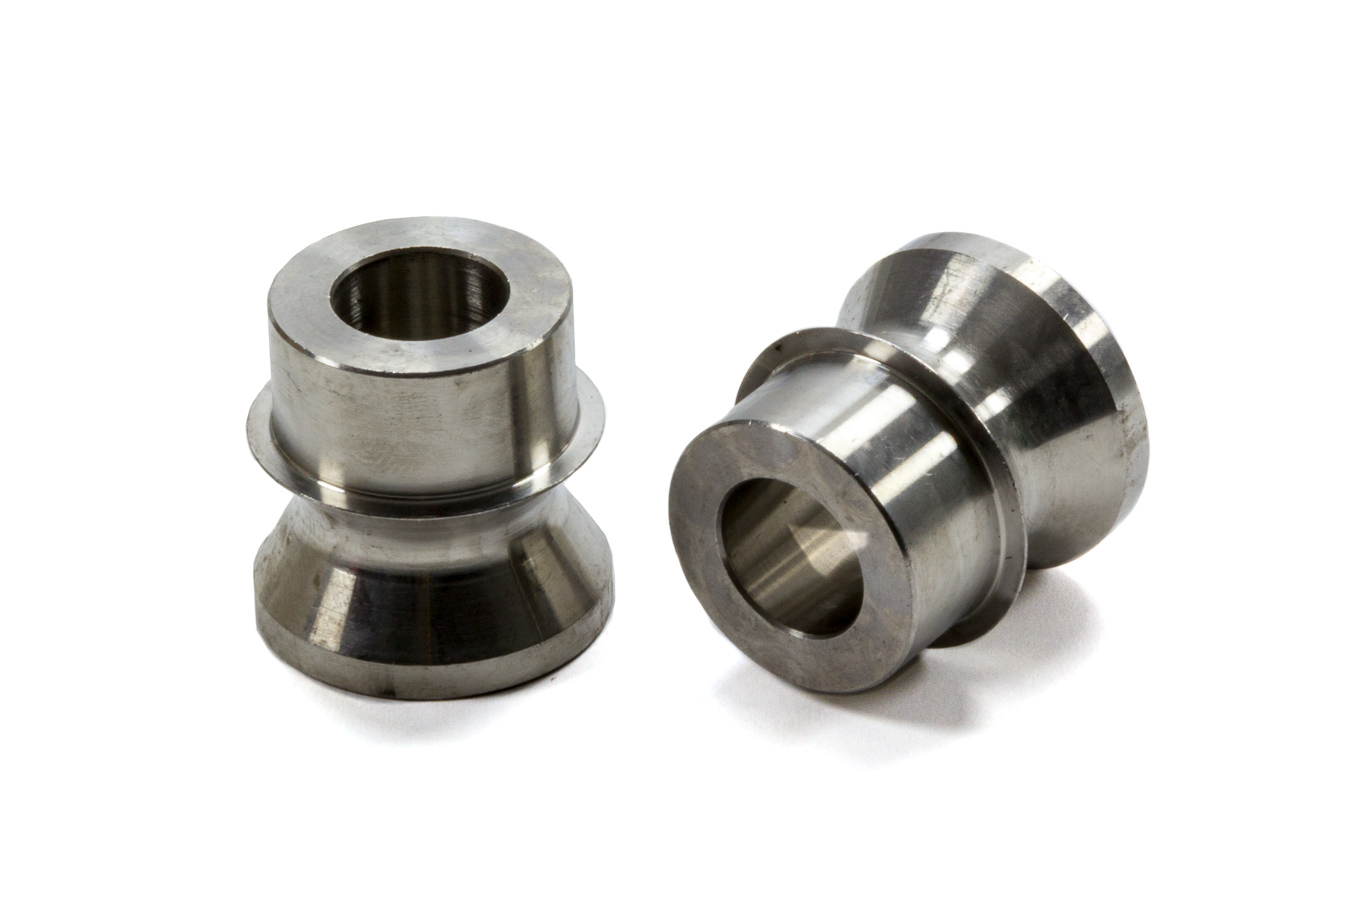 FK Rod Ends 8-6HB Rod End Bushing, 1/2 to 3/8 in Bore, High Misalignment, Steel, Natural, Pair